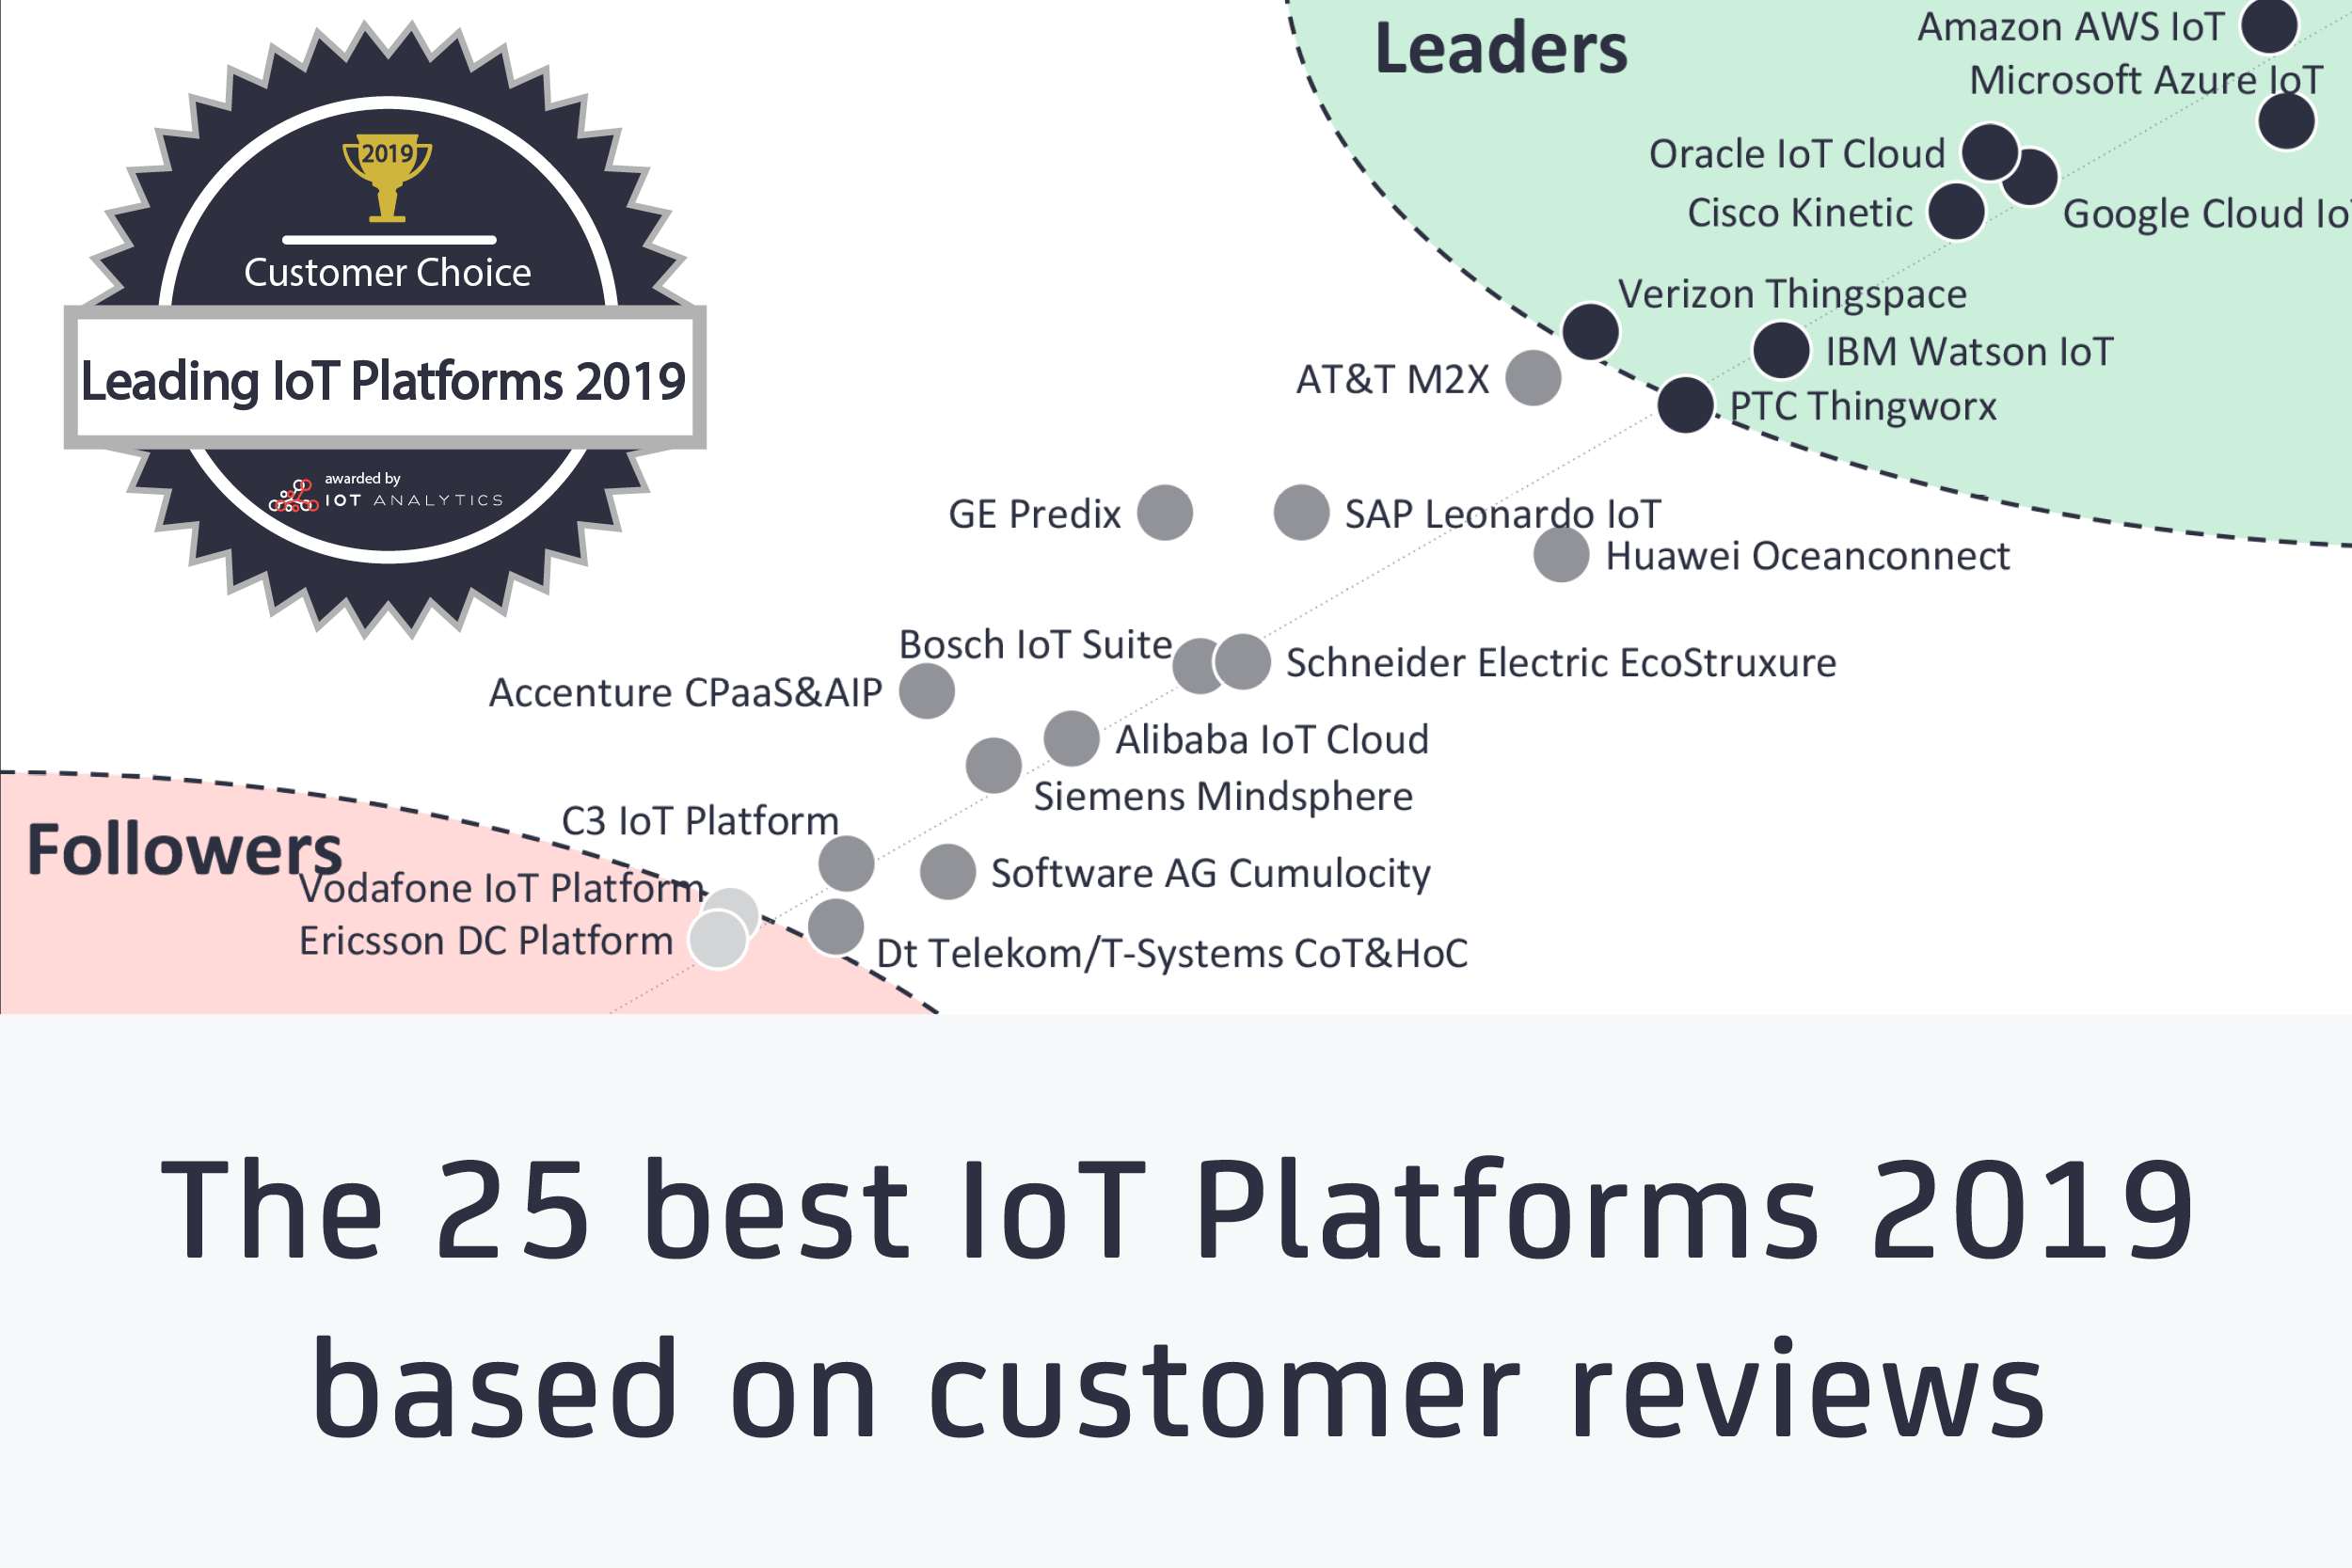 The 25 best IoT Platforms 2019 – based on customer reviews